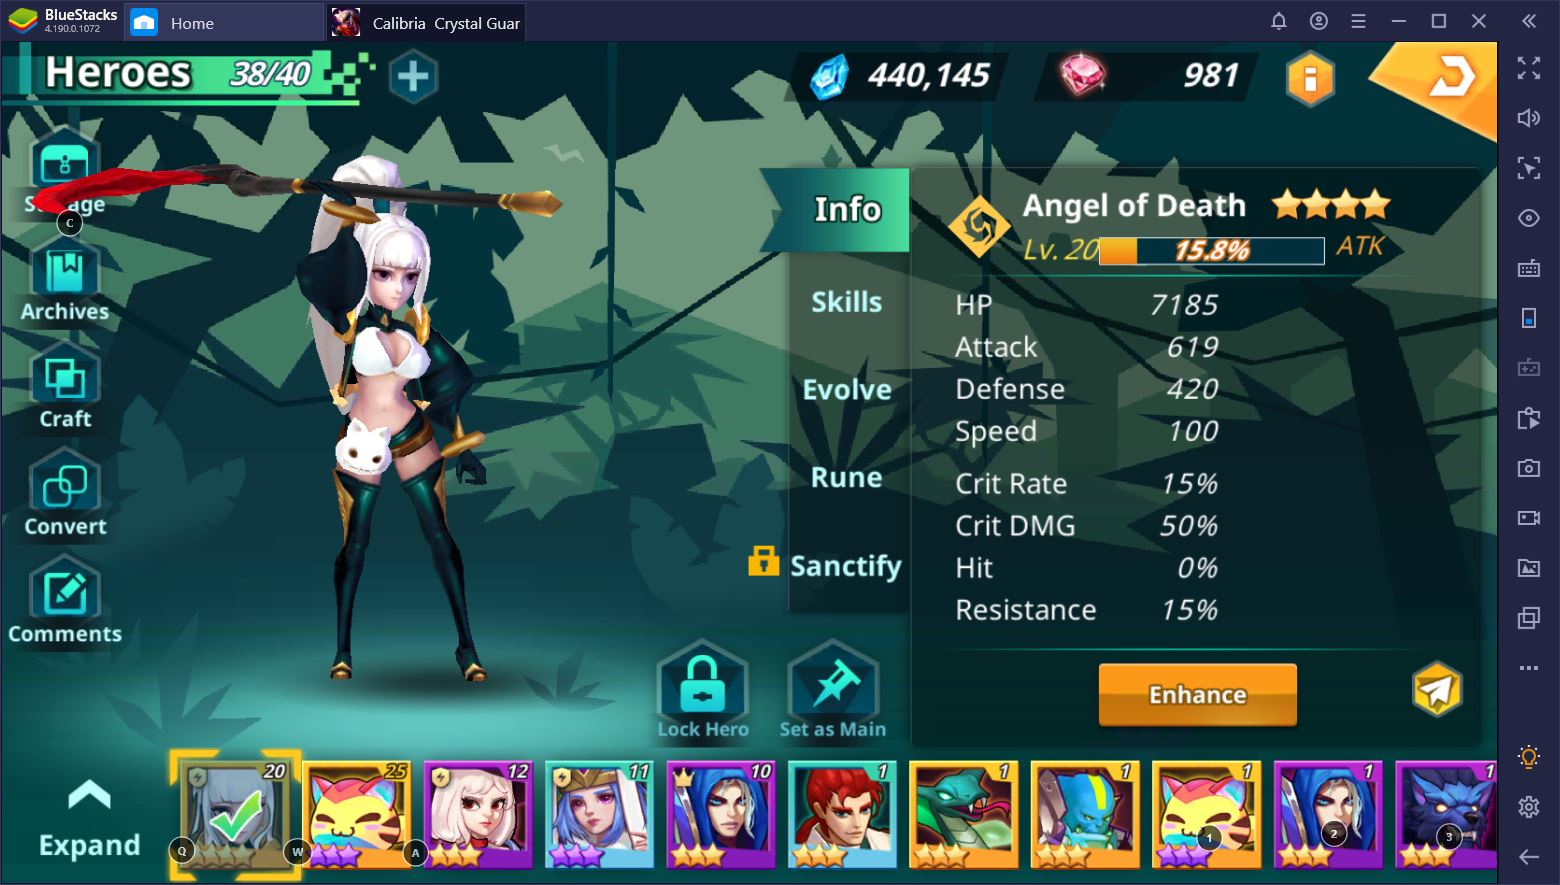 Calibria: Crystal Guardians – How to Get and Upgrade More Heroes